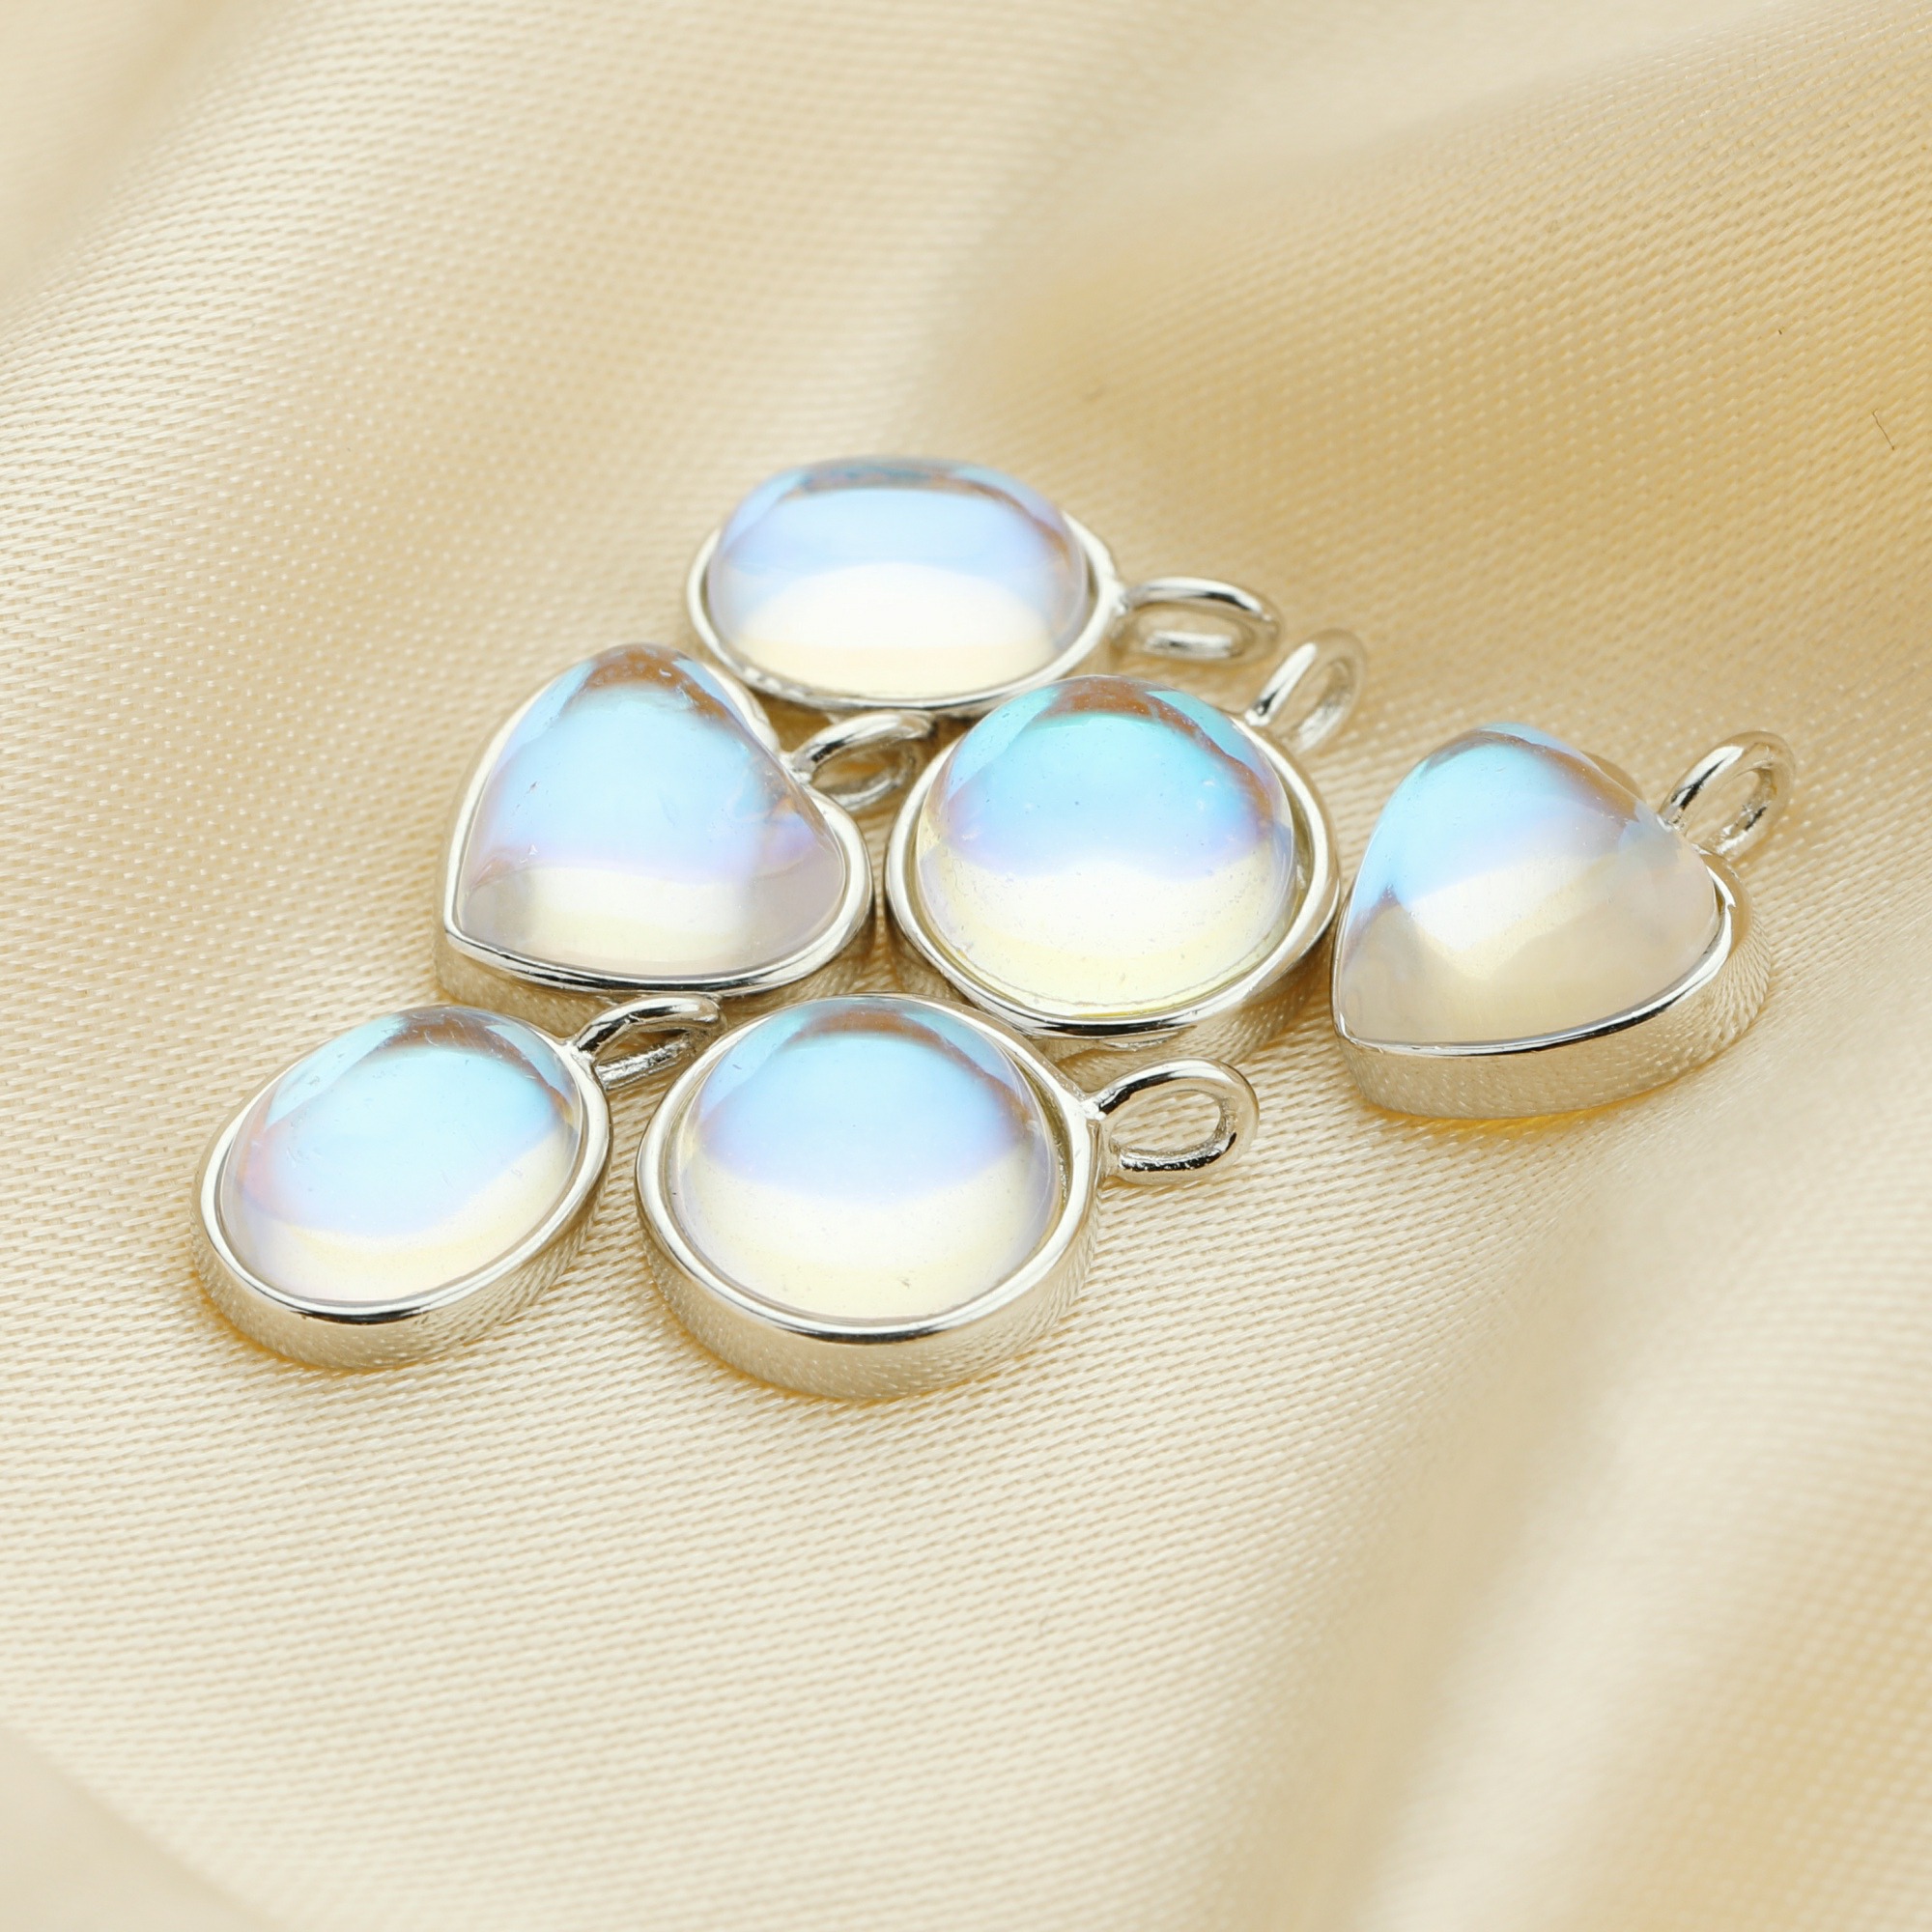 Simulated Glass Moonstone Charm,Round/Heart/Oval Solid 925 Sterling Silver Gold Plated Pendant Charm,DIY Pendant Charm Supplies 1431201 - Click Image to Close